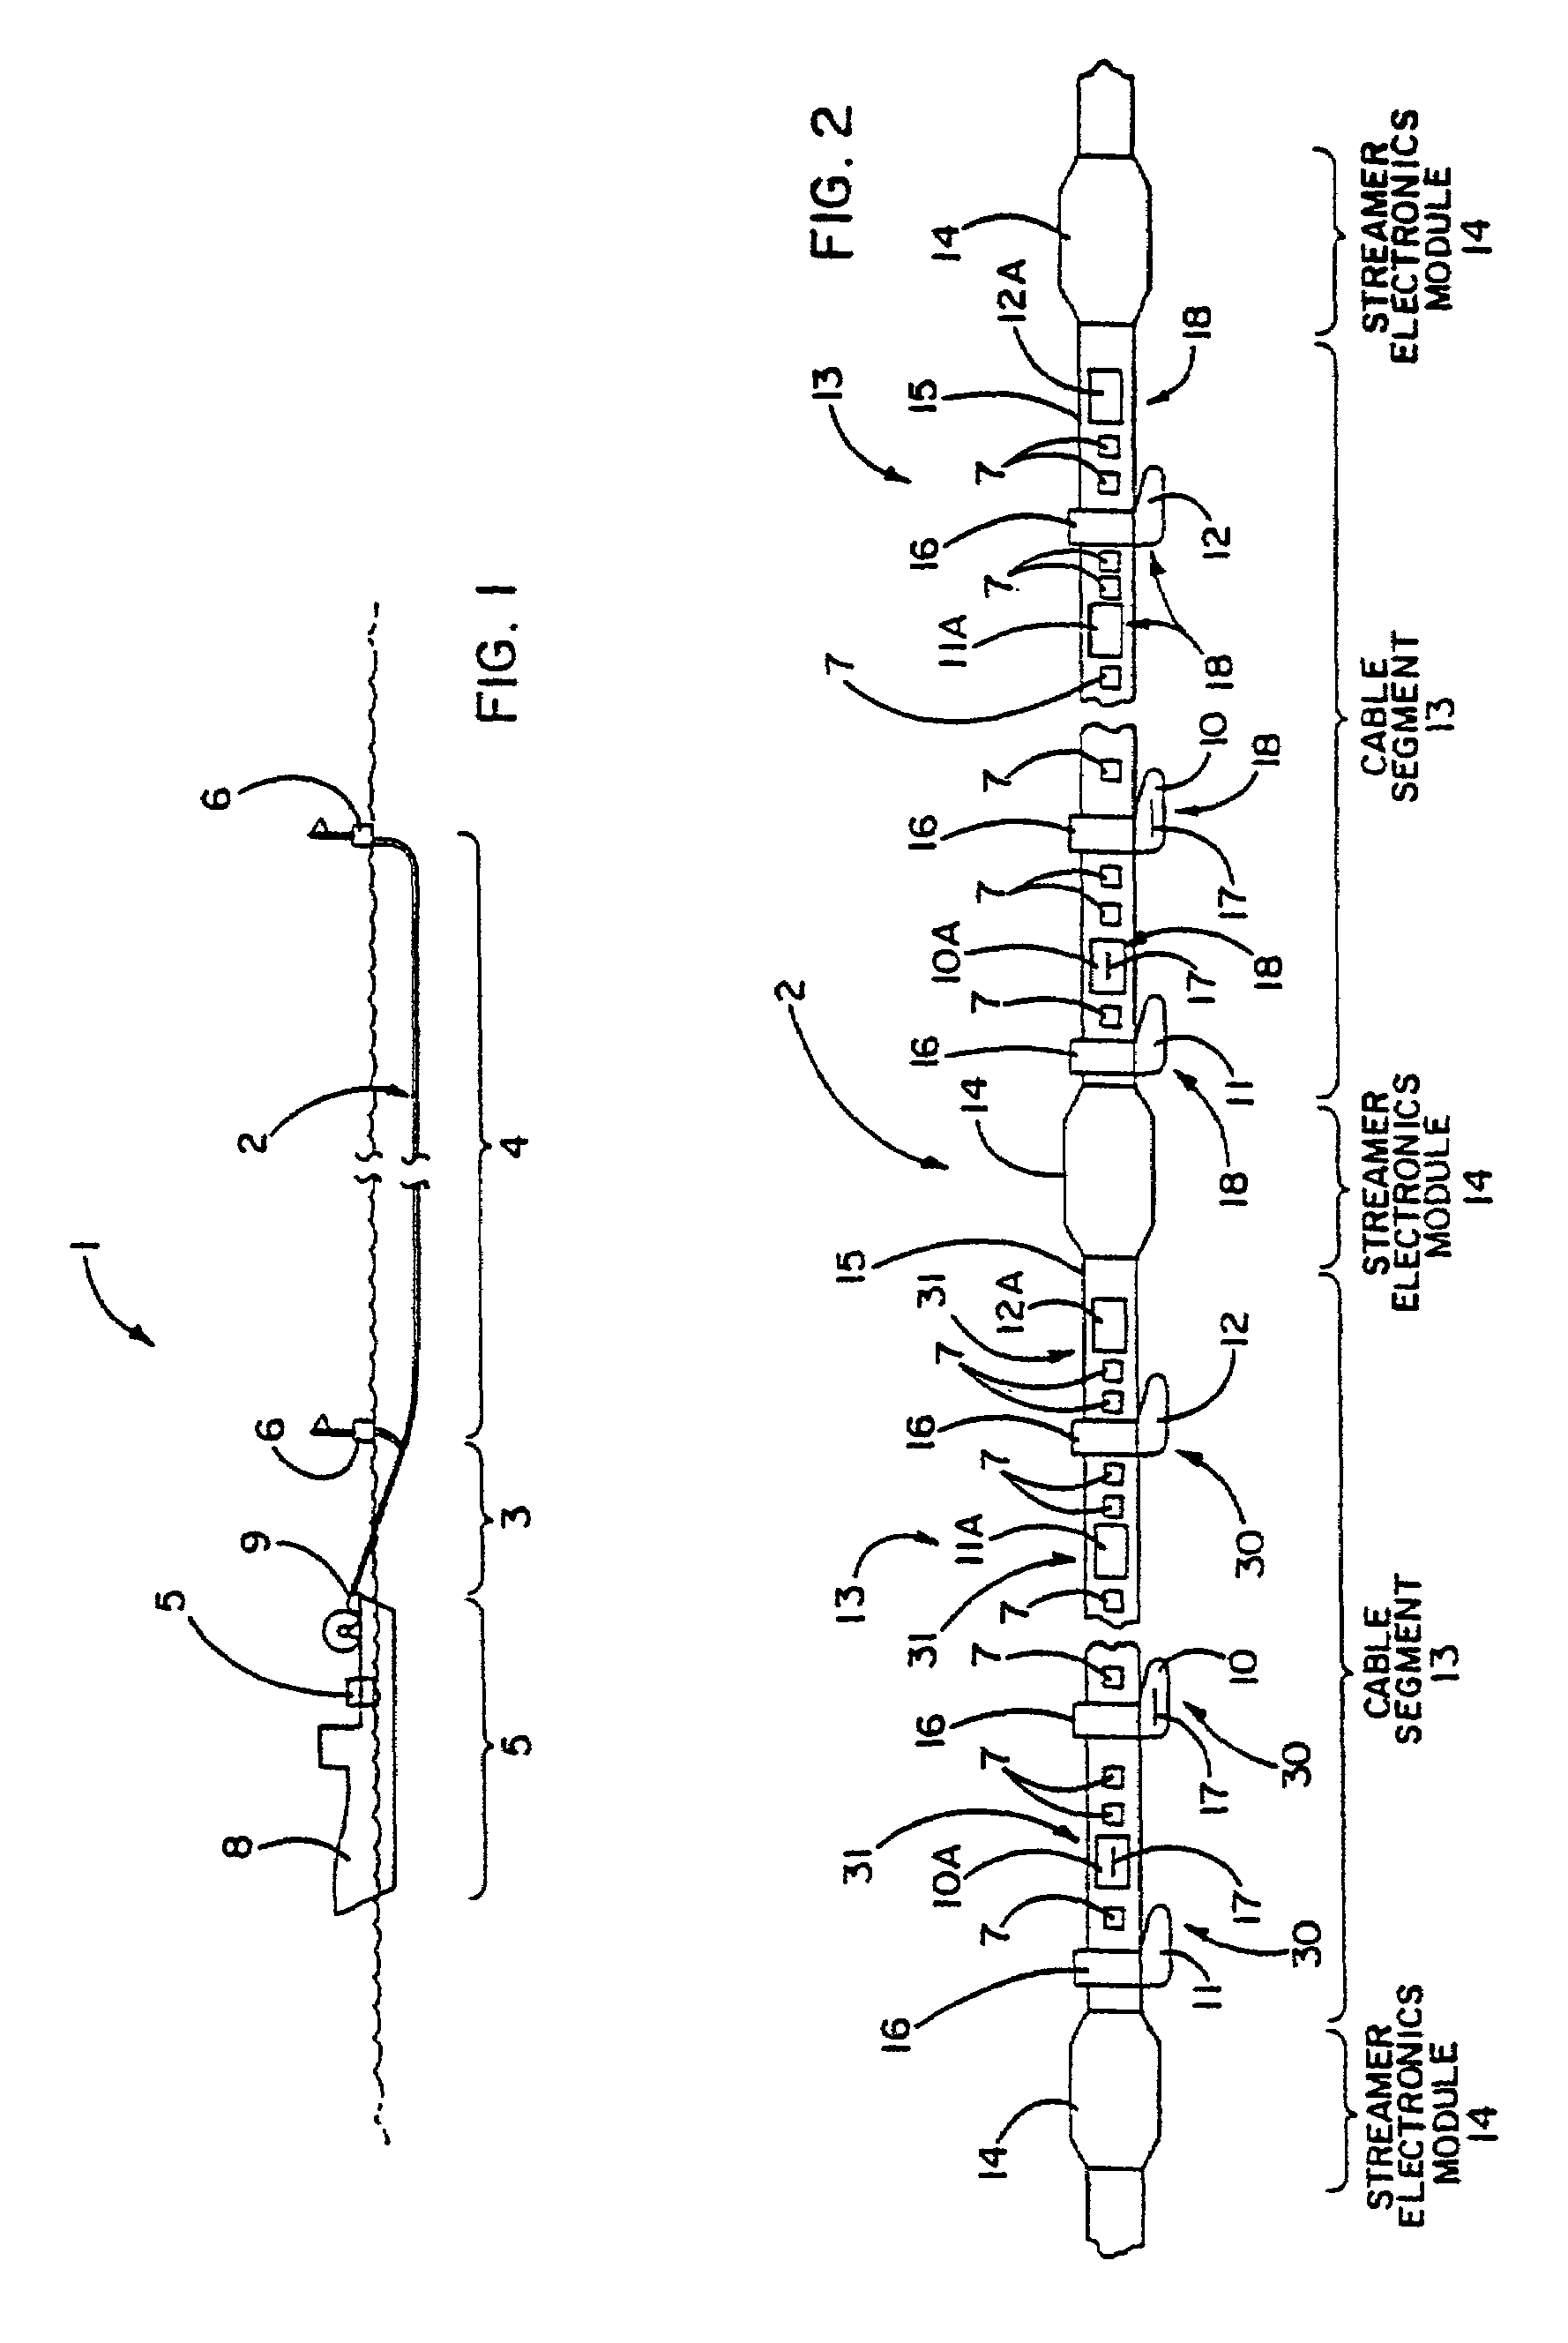 Electrical power distribution and communication system for an underwater cable